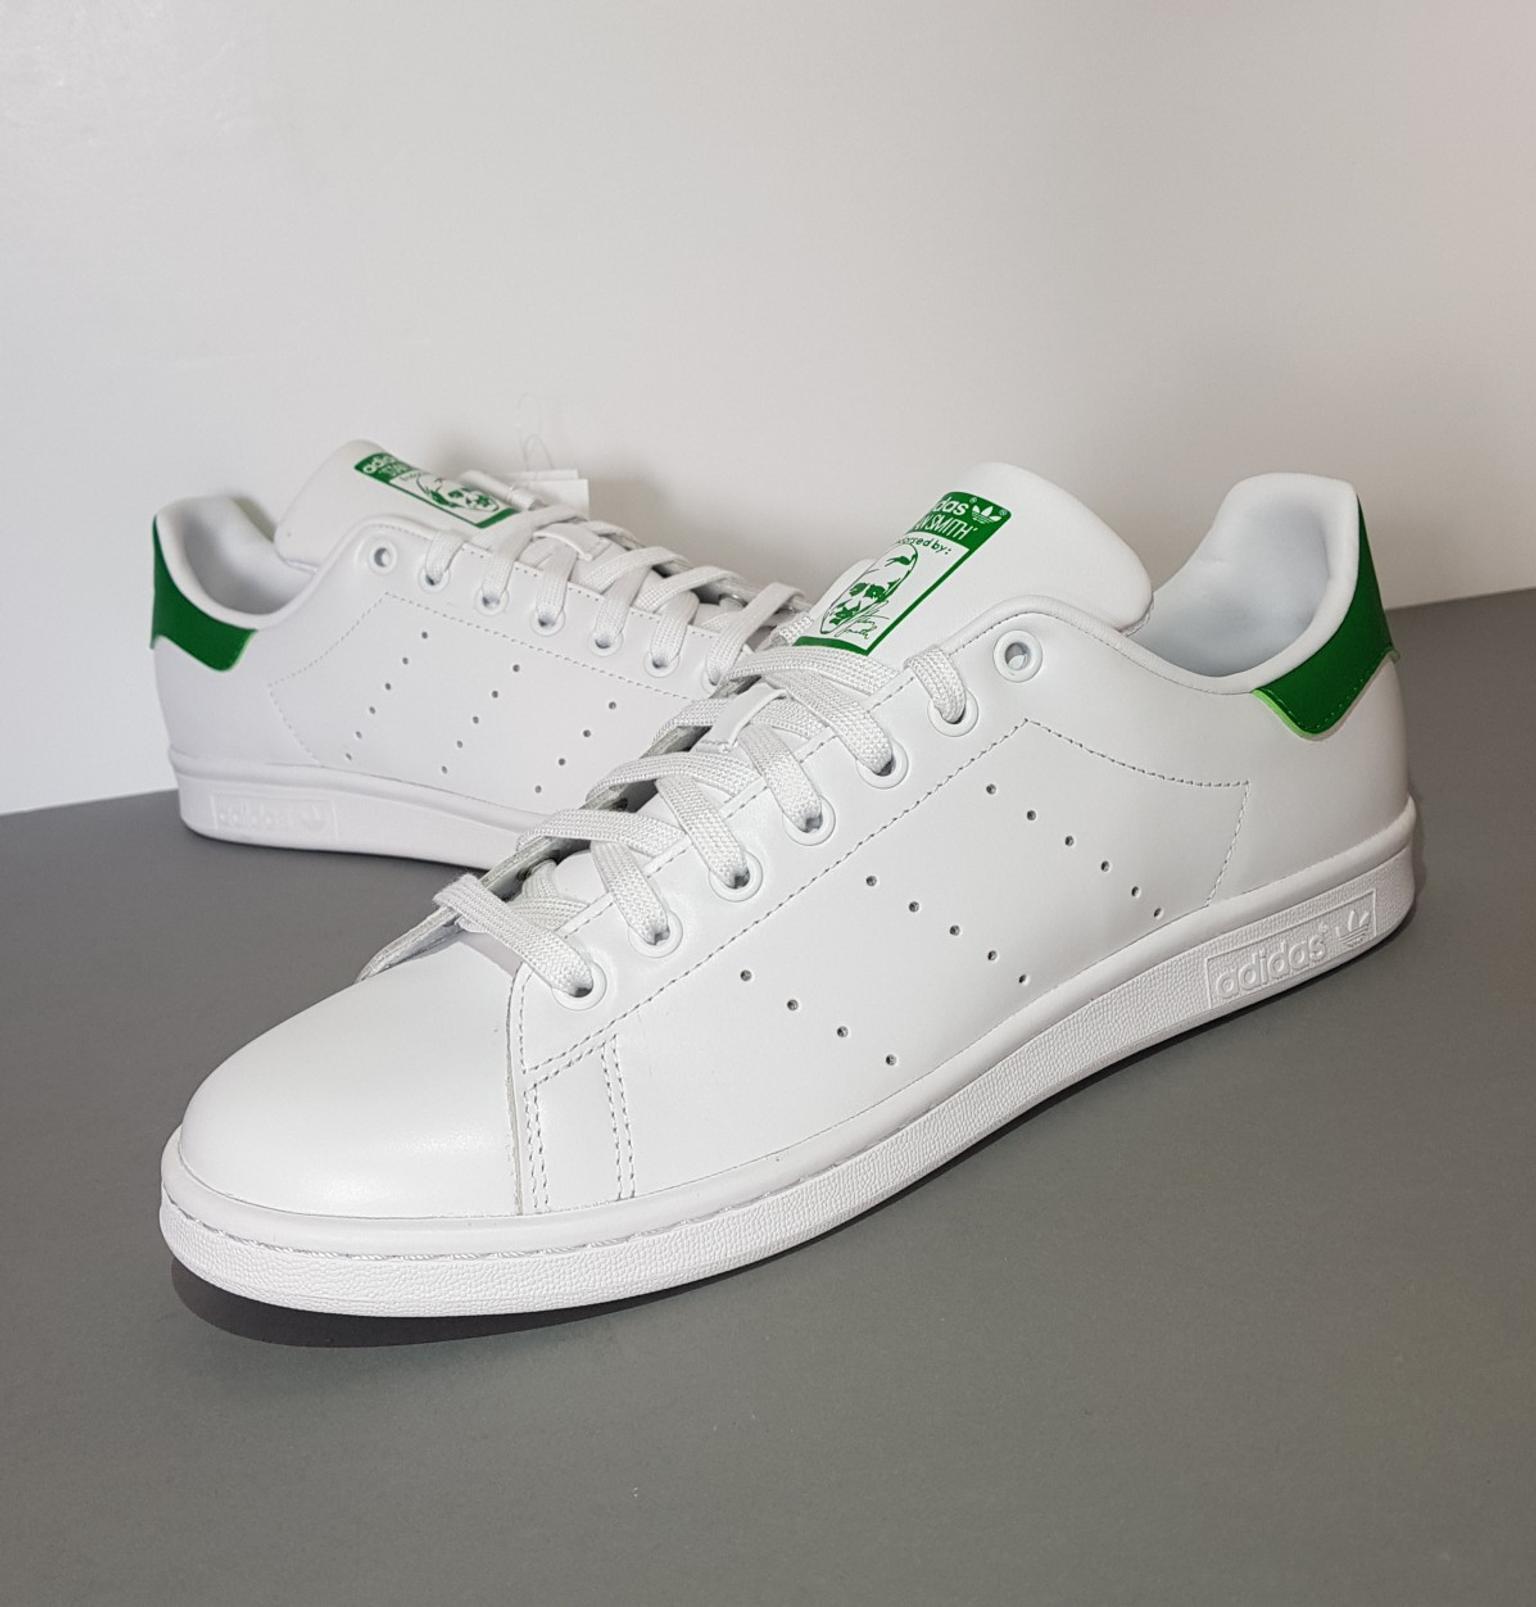 Adidas Stan Smith Leather Trainer Size 9.5 UK in LS16 Leeds for £45.00 for  sale | Shpock